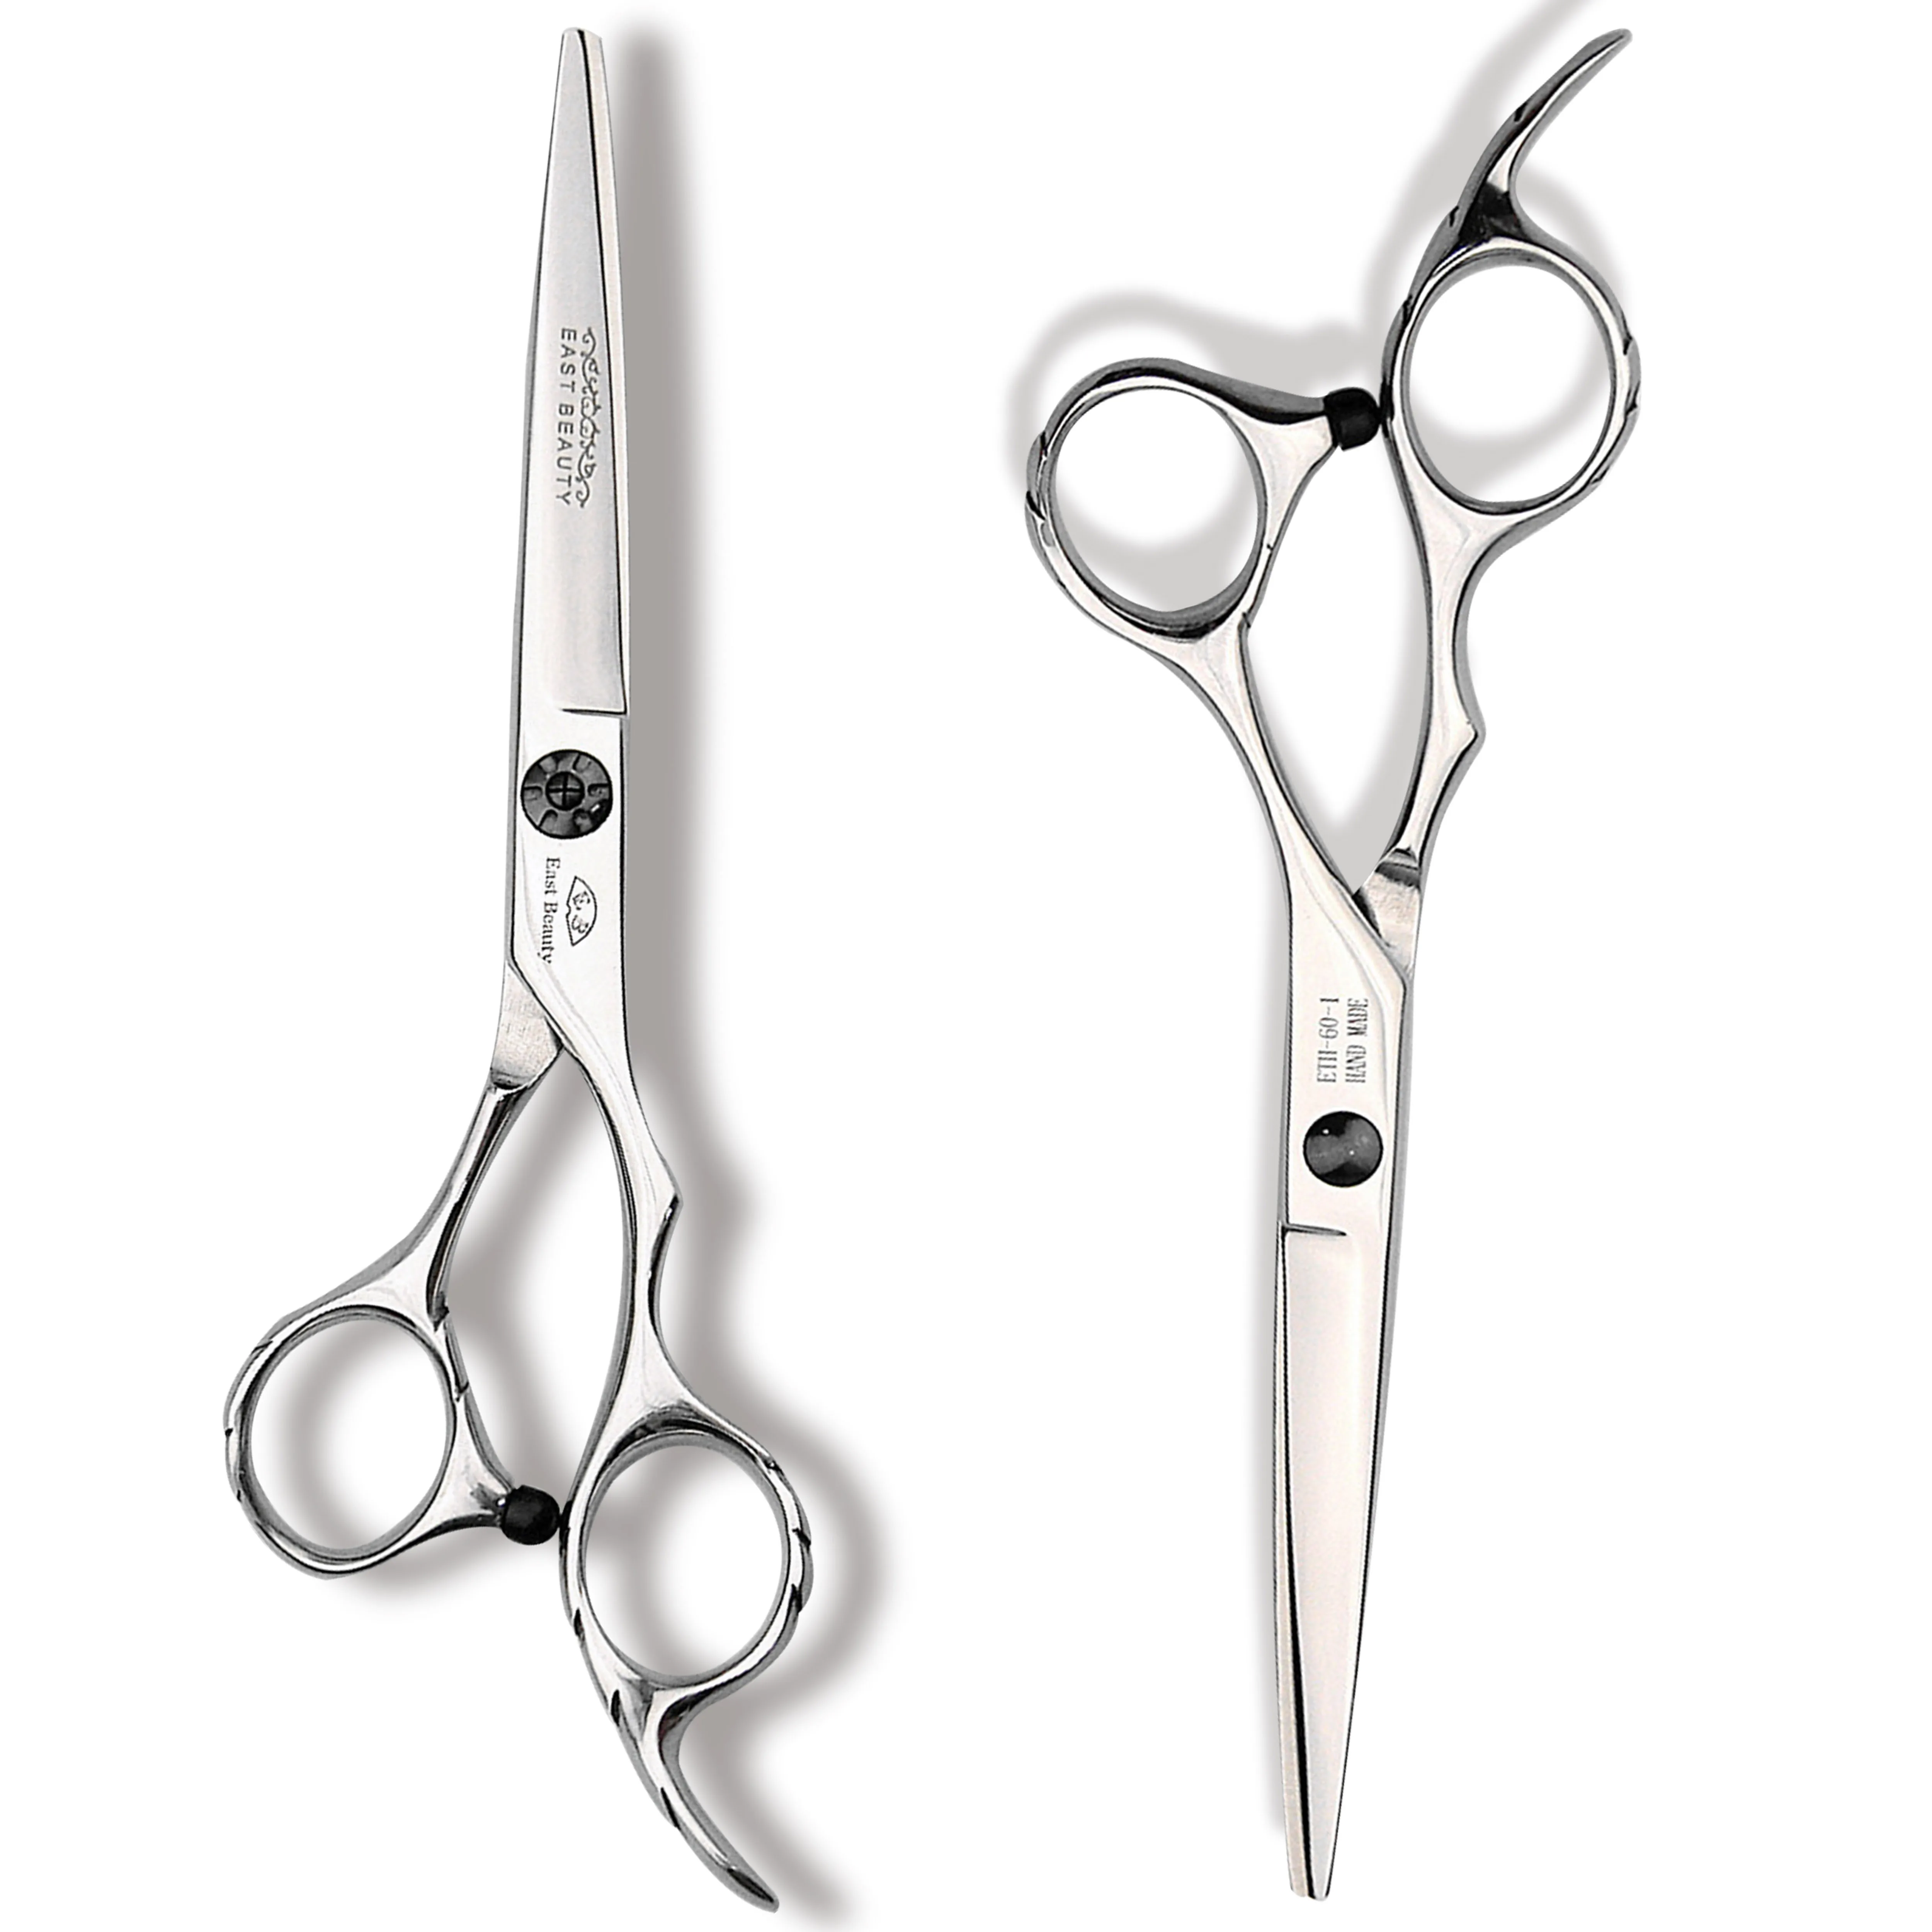 

Marigold Professional high quality hot sale japanese SUS 440c steel cobalt hairdressing scissors shears for beauty/salon/barber, Silver